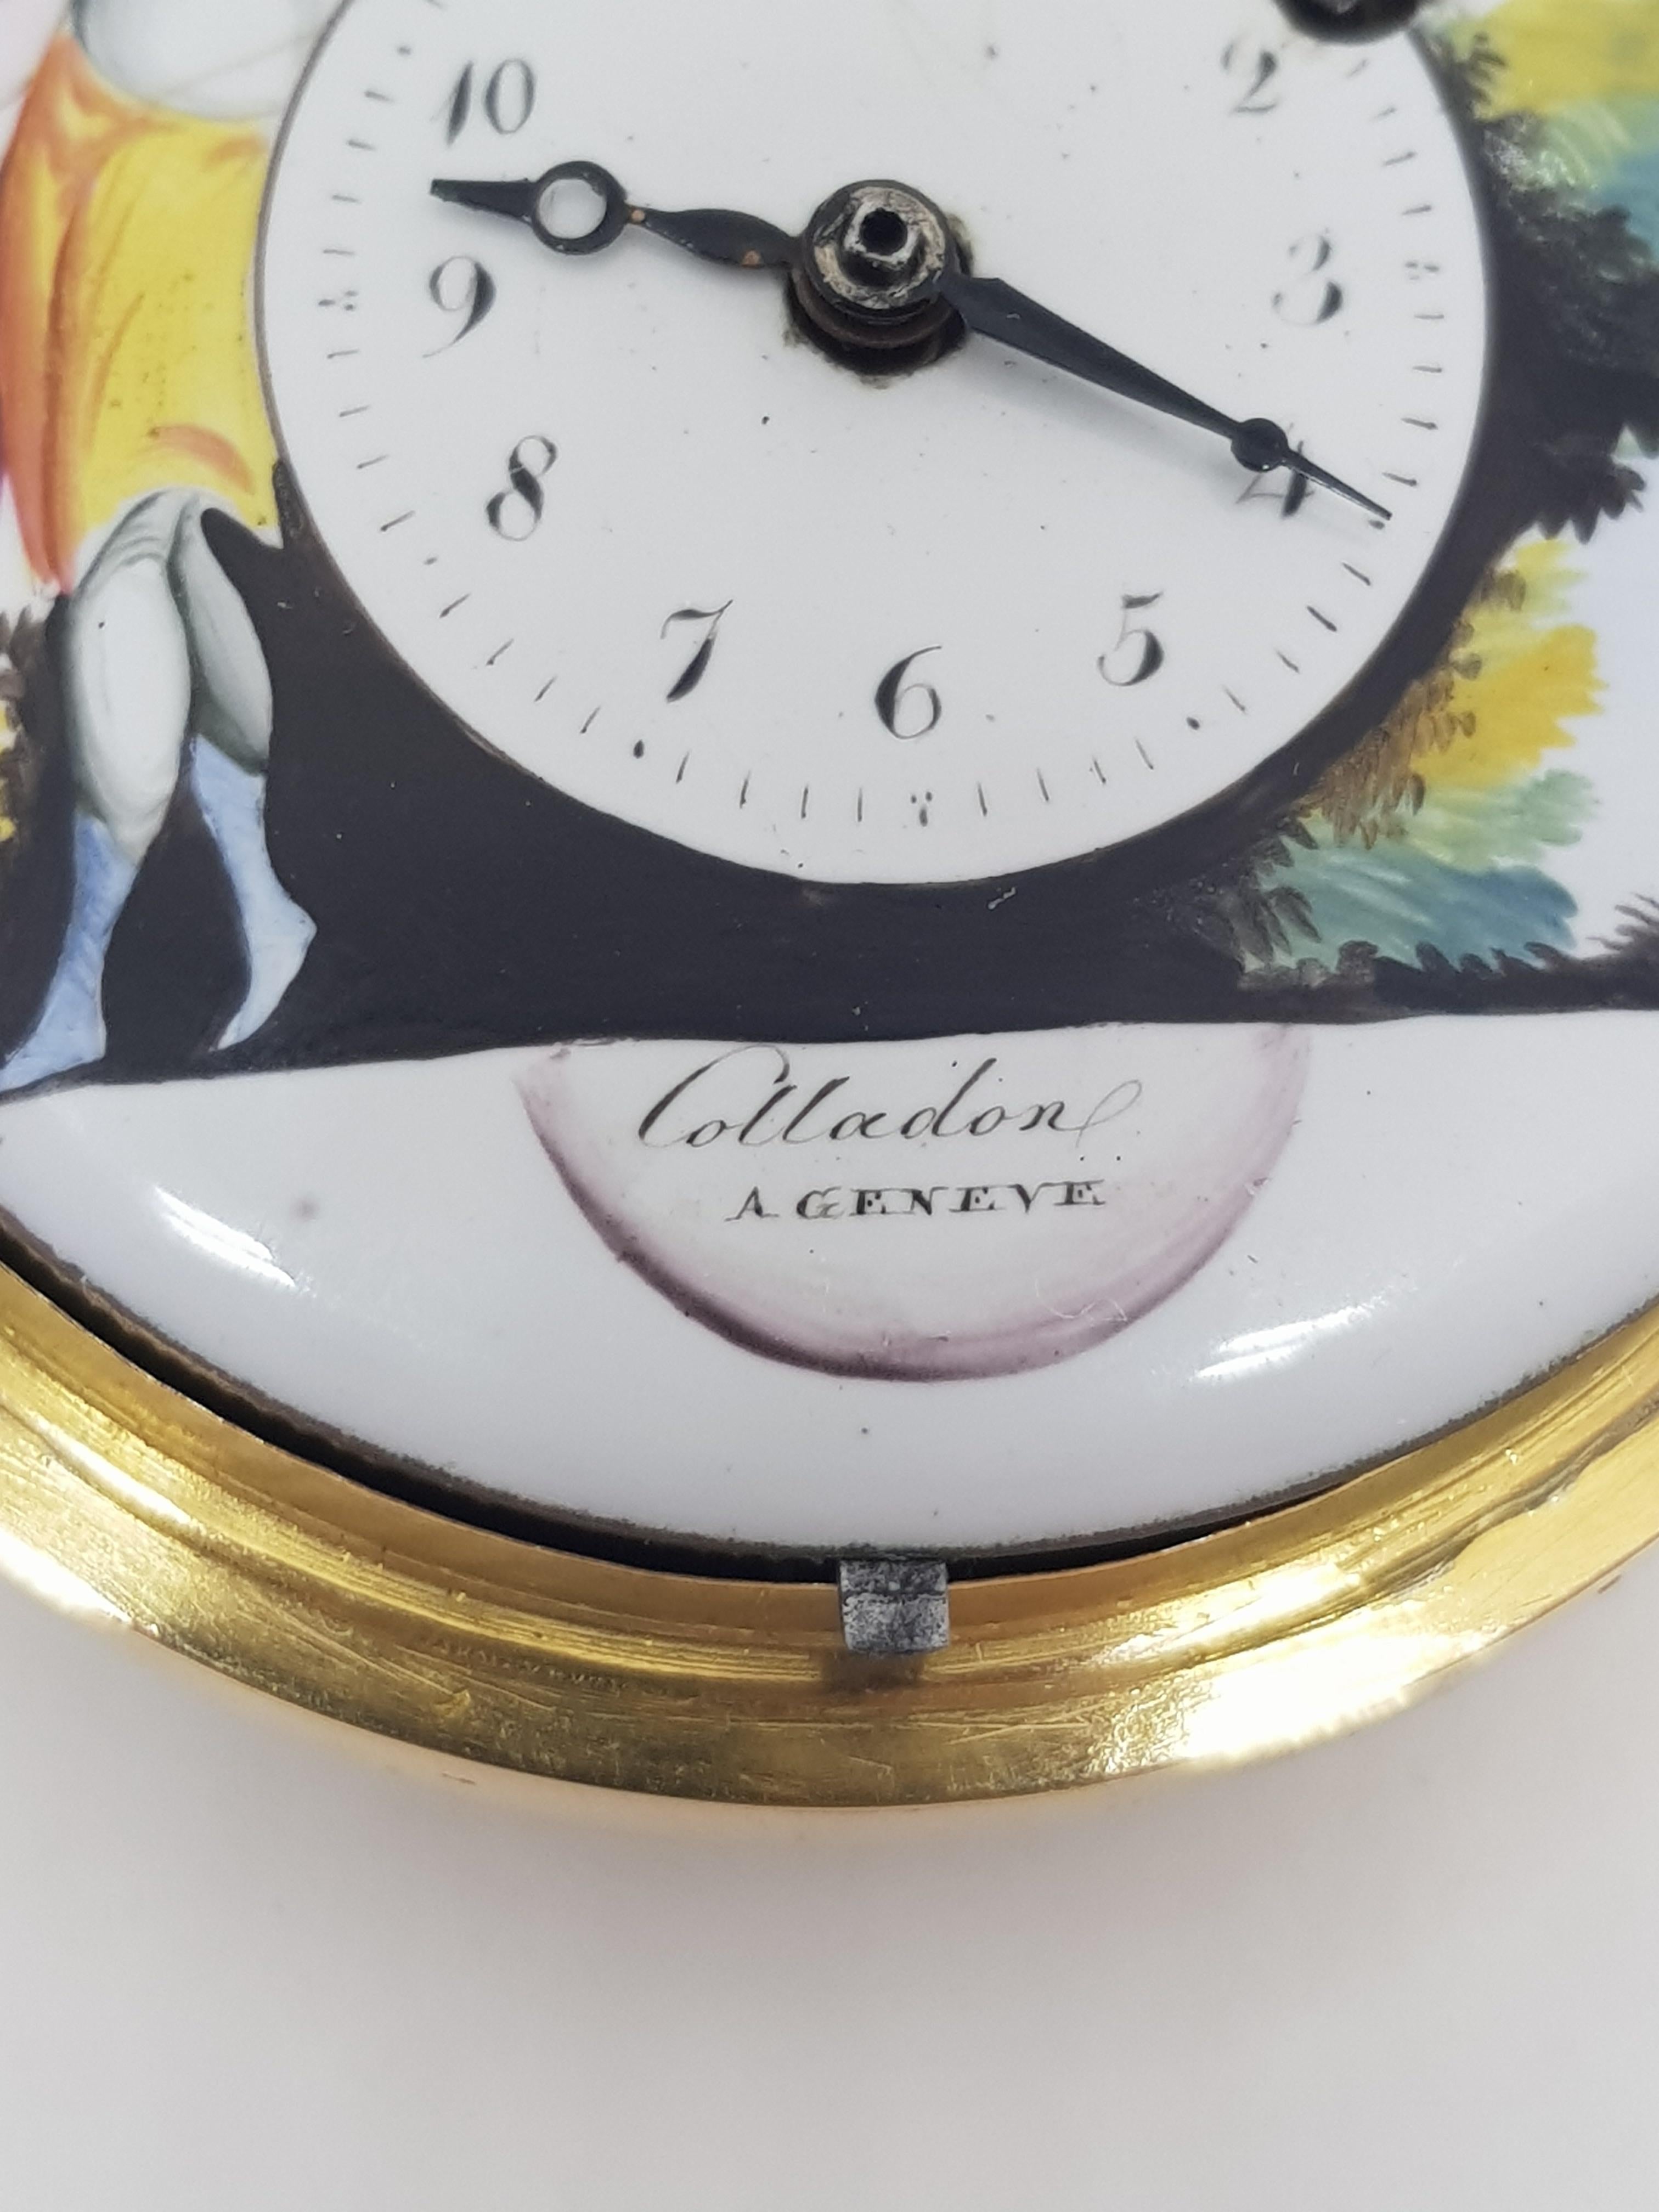 Cabochon Colladon A. Geneve Antique Turquoise Baby Pearls Enamel Gold Pocket Watch For Sale